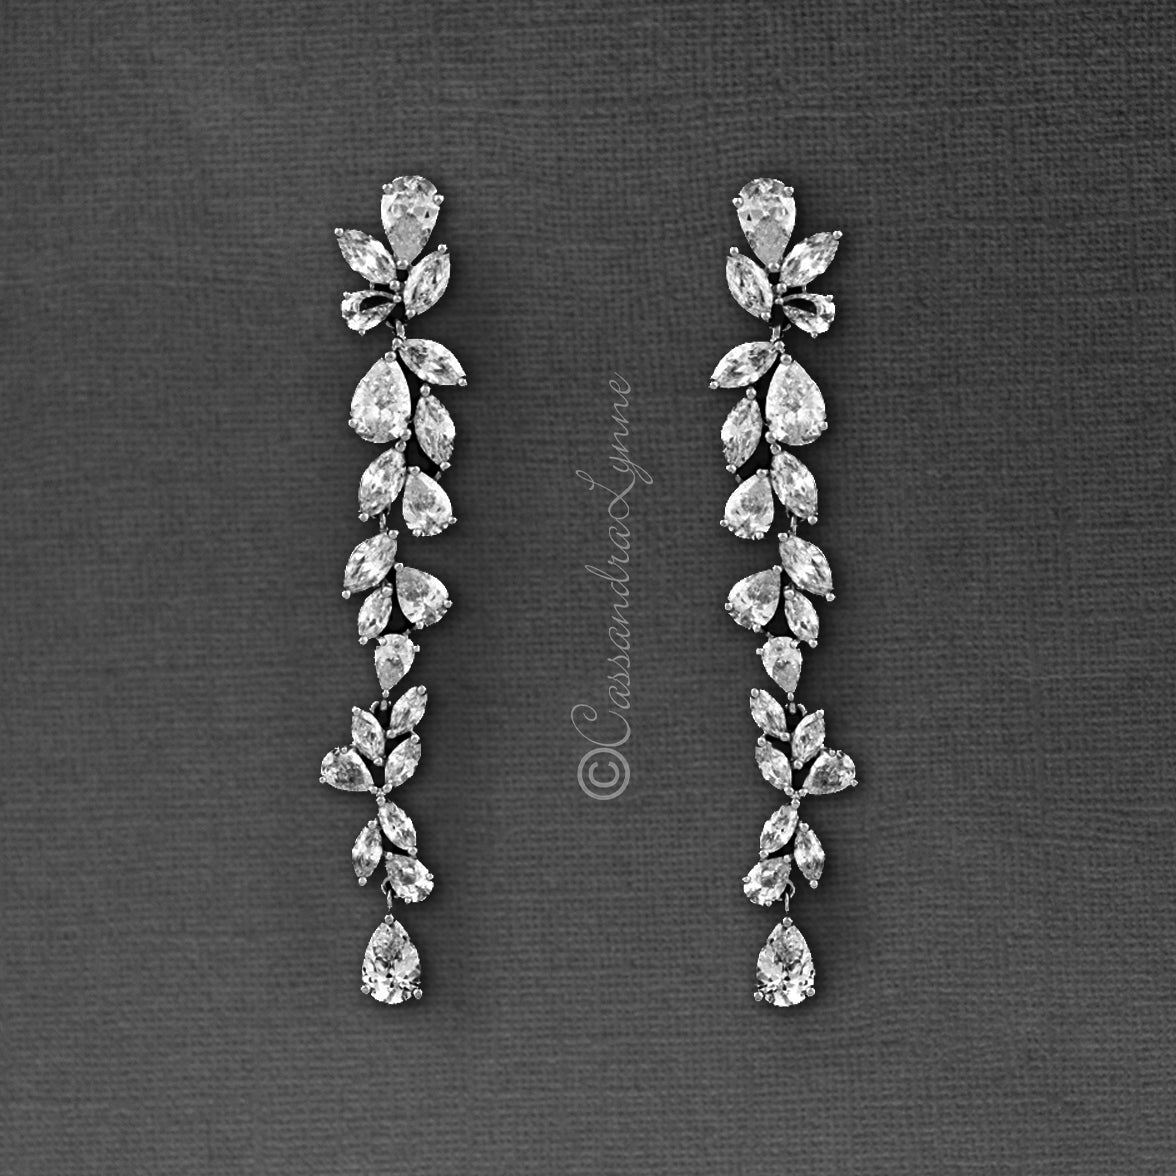 Bridal Earrings of Teardrop and Marquise CZ Sterling Silver